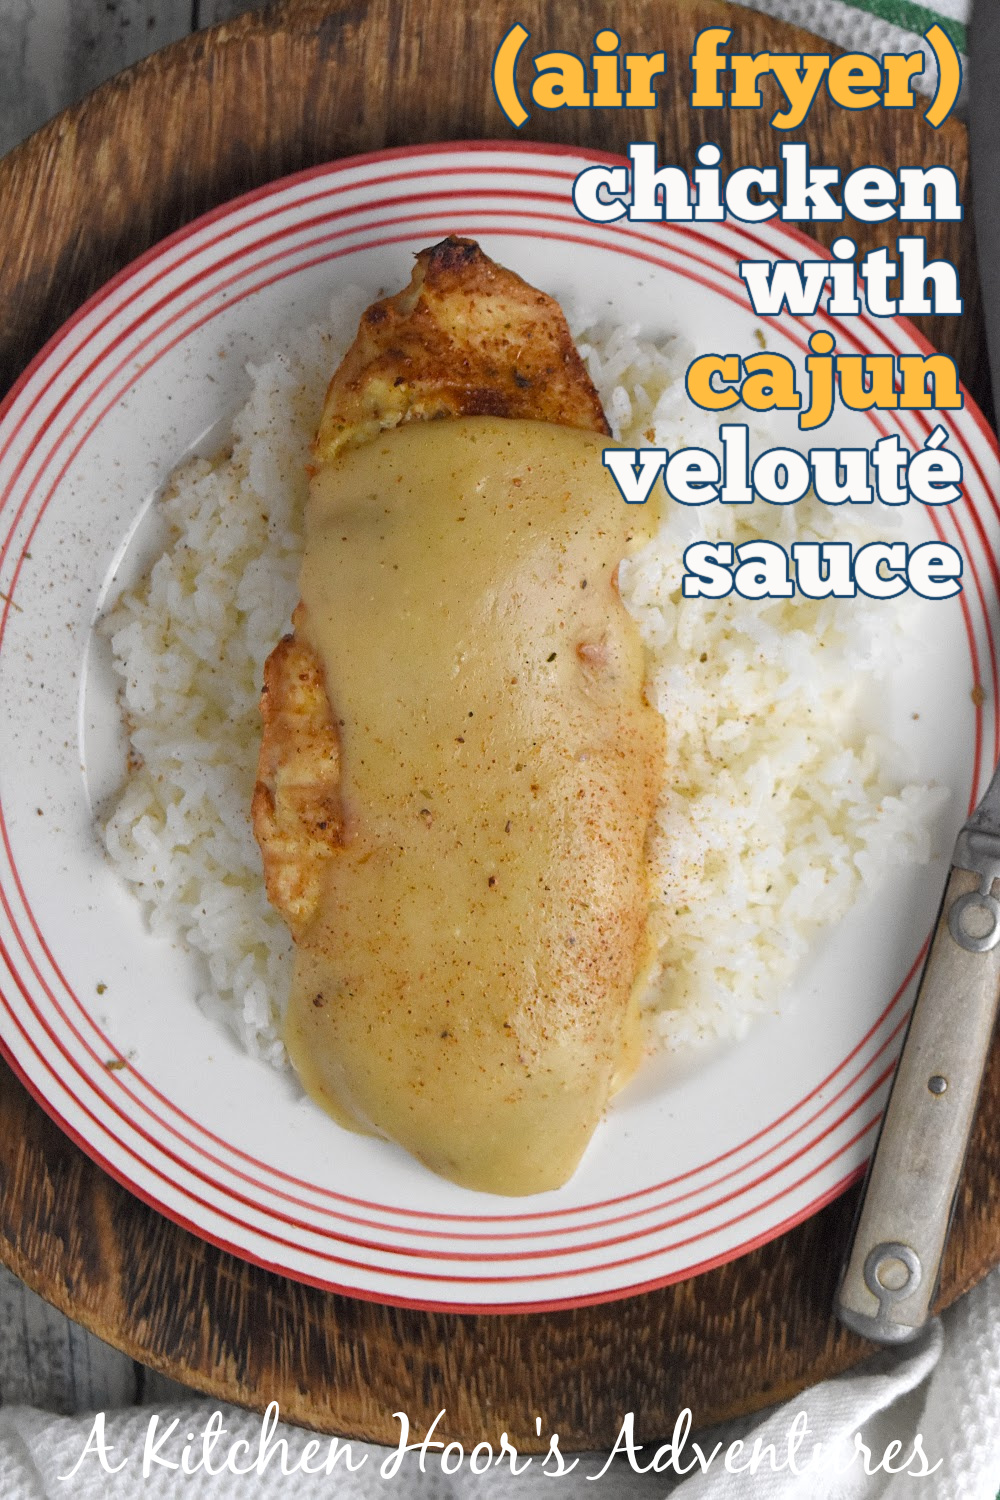 Air Fryer Chicken with Cajun Velouté Sauce sounds fancy but it’s made with simple ingredients. Chicken, butter, flour, broth, and Cajun seasoning is all you need for this delicious dinner. #OurFamilyTable #Veloutesauce #Mothersauces #Cajun #airfryerchicken
